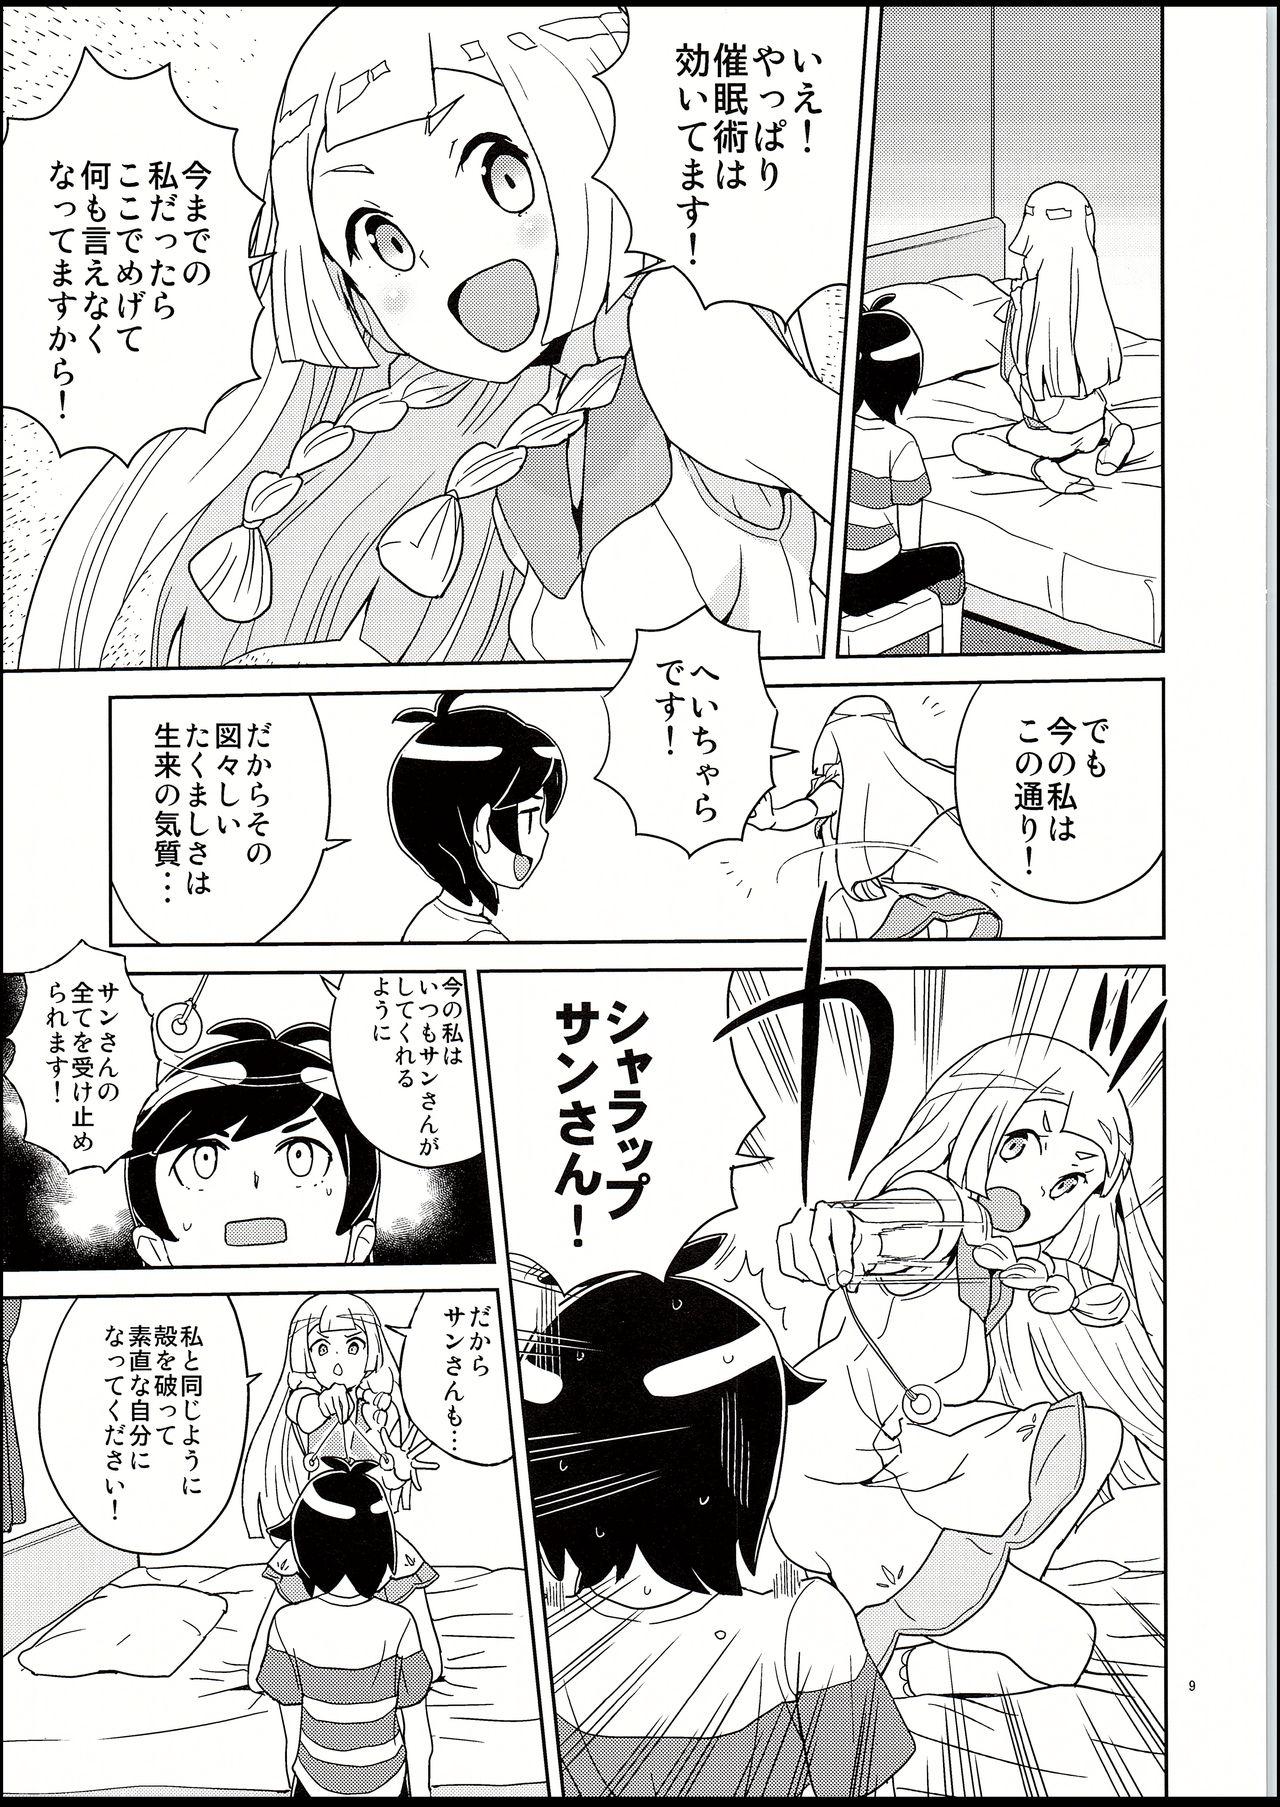 Housewife Lillie to Sun no Saimin Daisakusen - Lillie and Sun's Hypnotized Campaign - Pokemon Youporn - Page 8